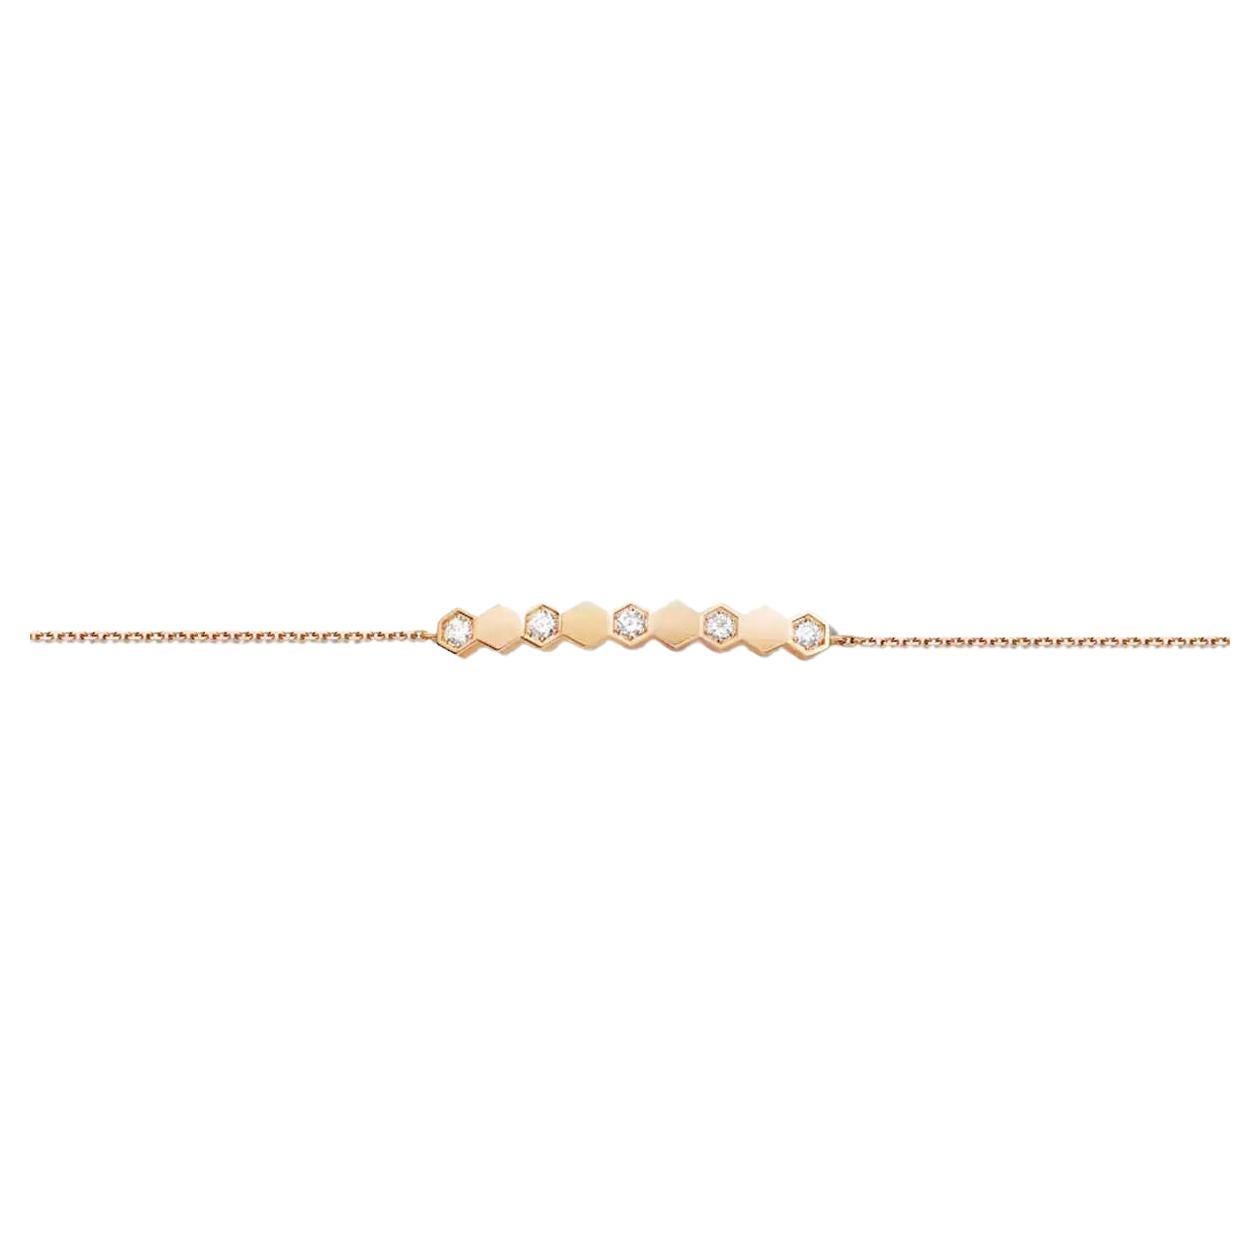 Chaumet Rose Gold Bracelet with Diamonds, '084679-000' For Sale